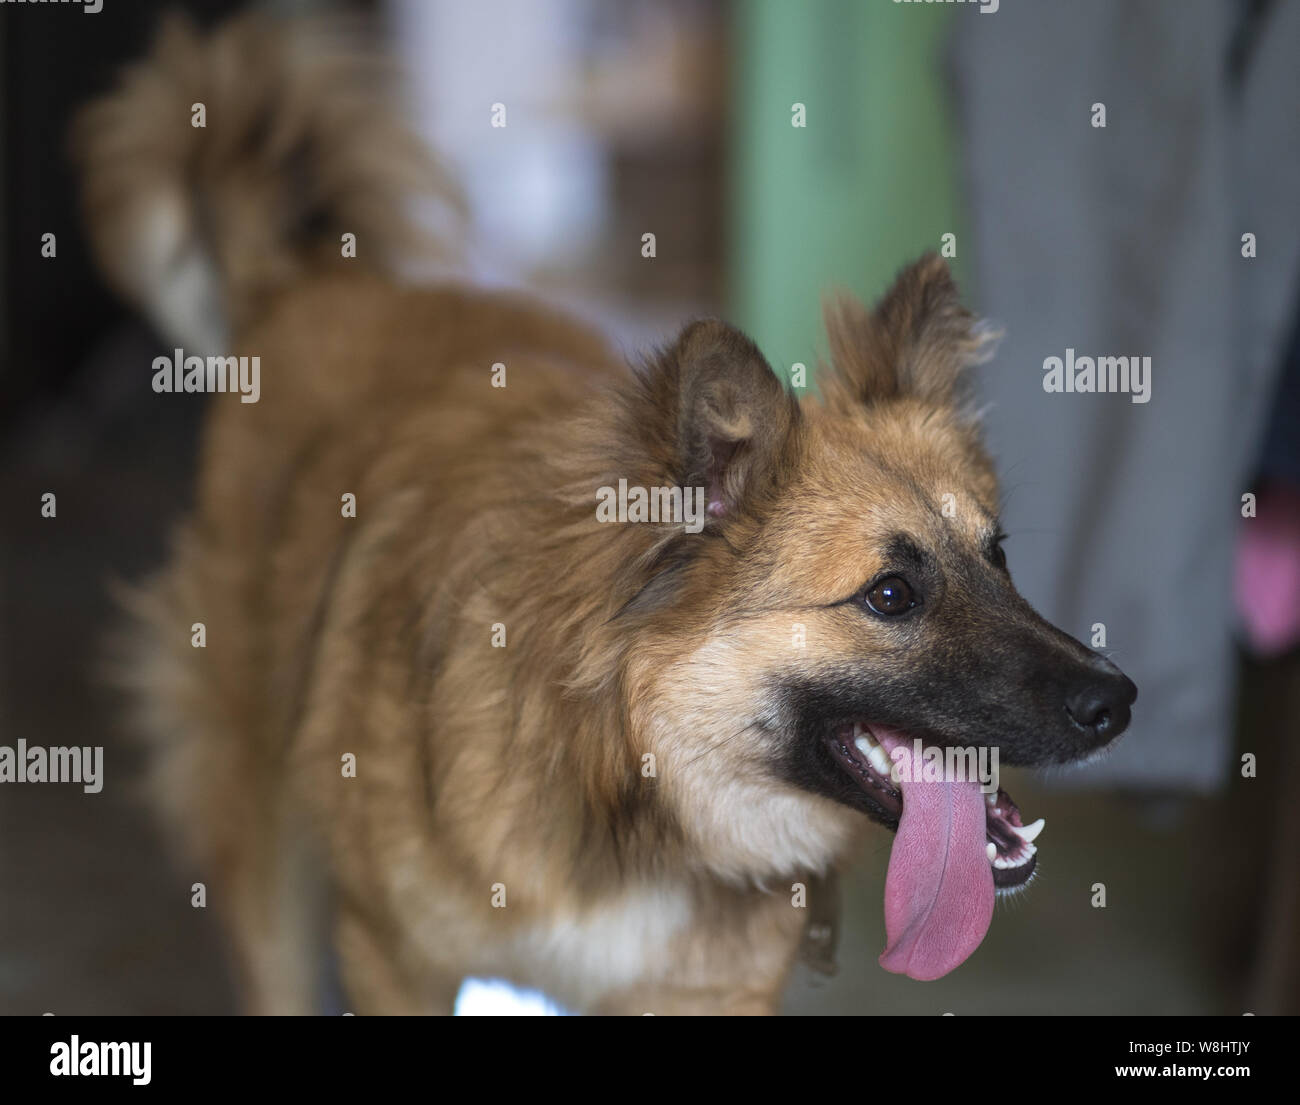 A mongrel, mixed-breed dog or mutt. A shot of mixed breed dog focused on the muzzle of the dog with a tongue out. Cute mixed-breed dog indoors Stock Photo